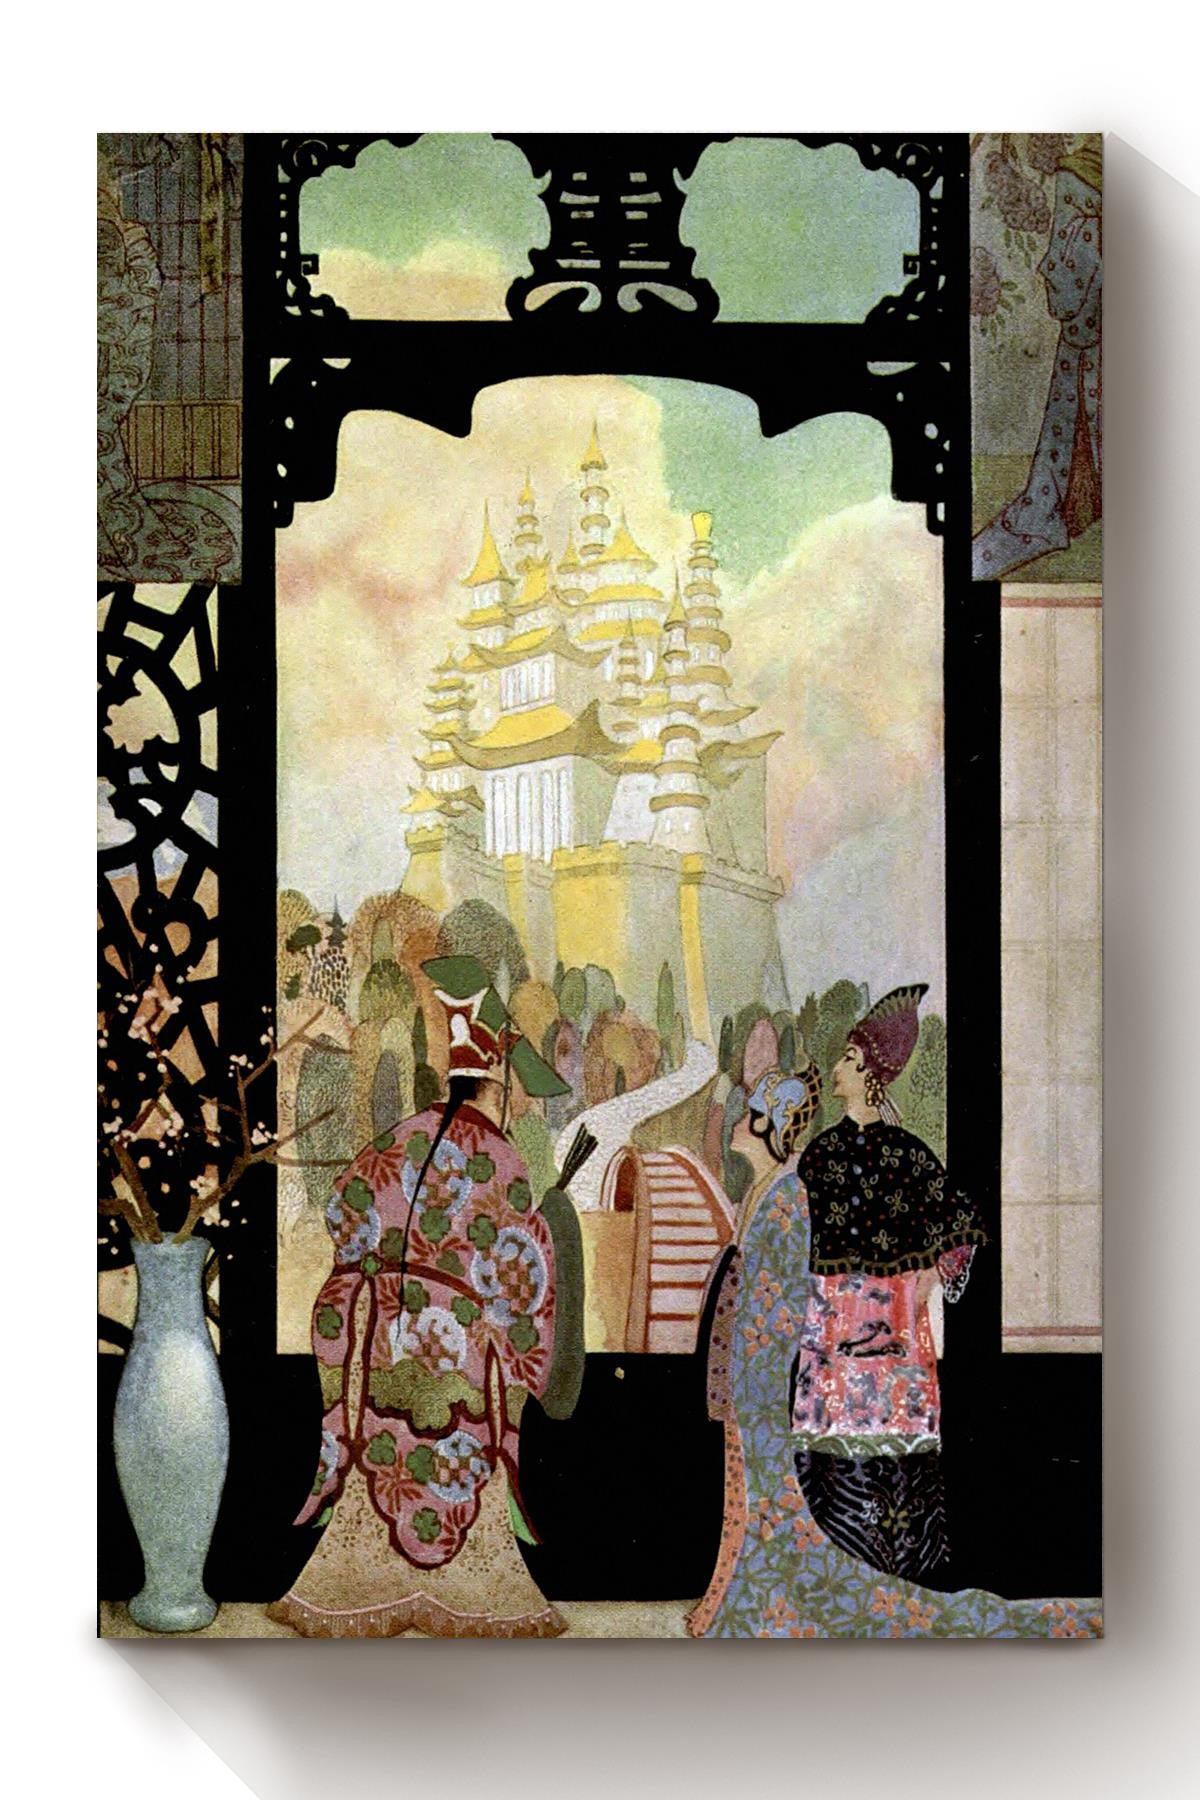 Alladin And His Wonderful Lamp The Arabian Nights Thomas Mackenzie Fairy Tales Illustration 08 Canvas Wrapped Canvas 8x10